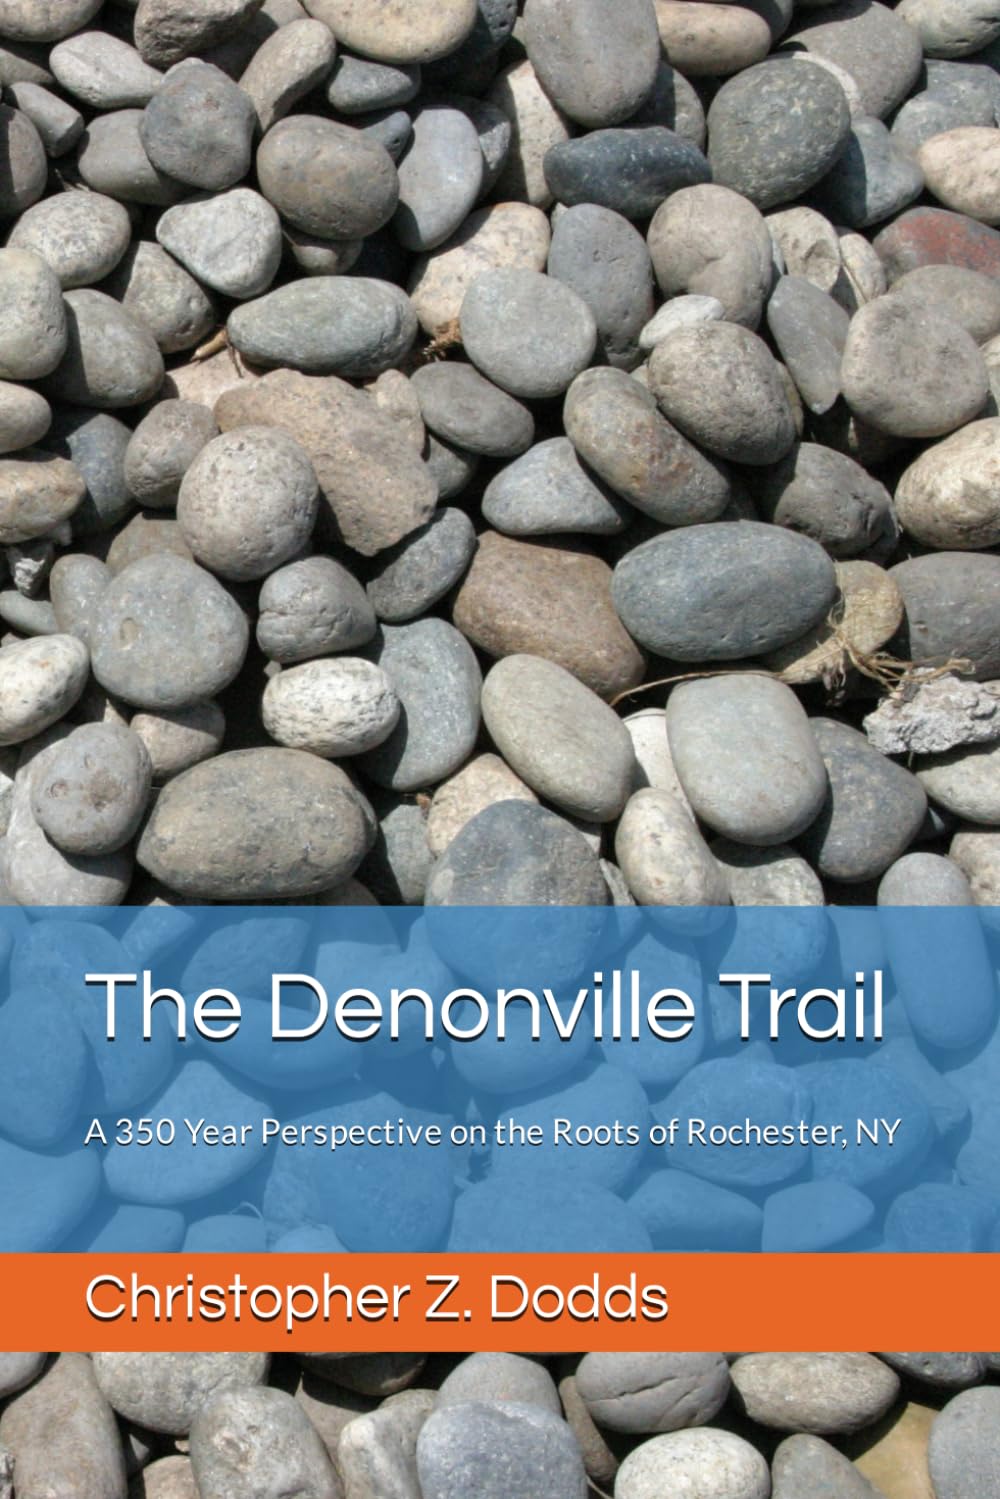 The Denonville Trail: A 350 Year Perspective on the Roots of Rochester, NY